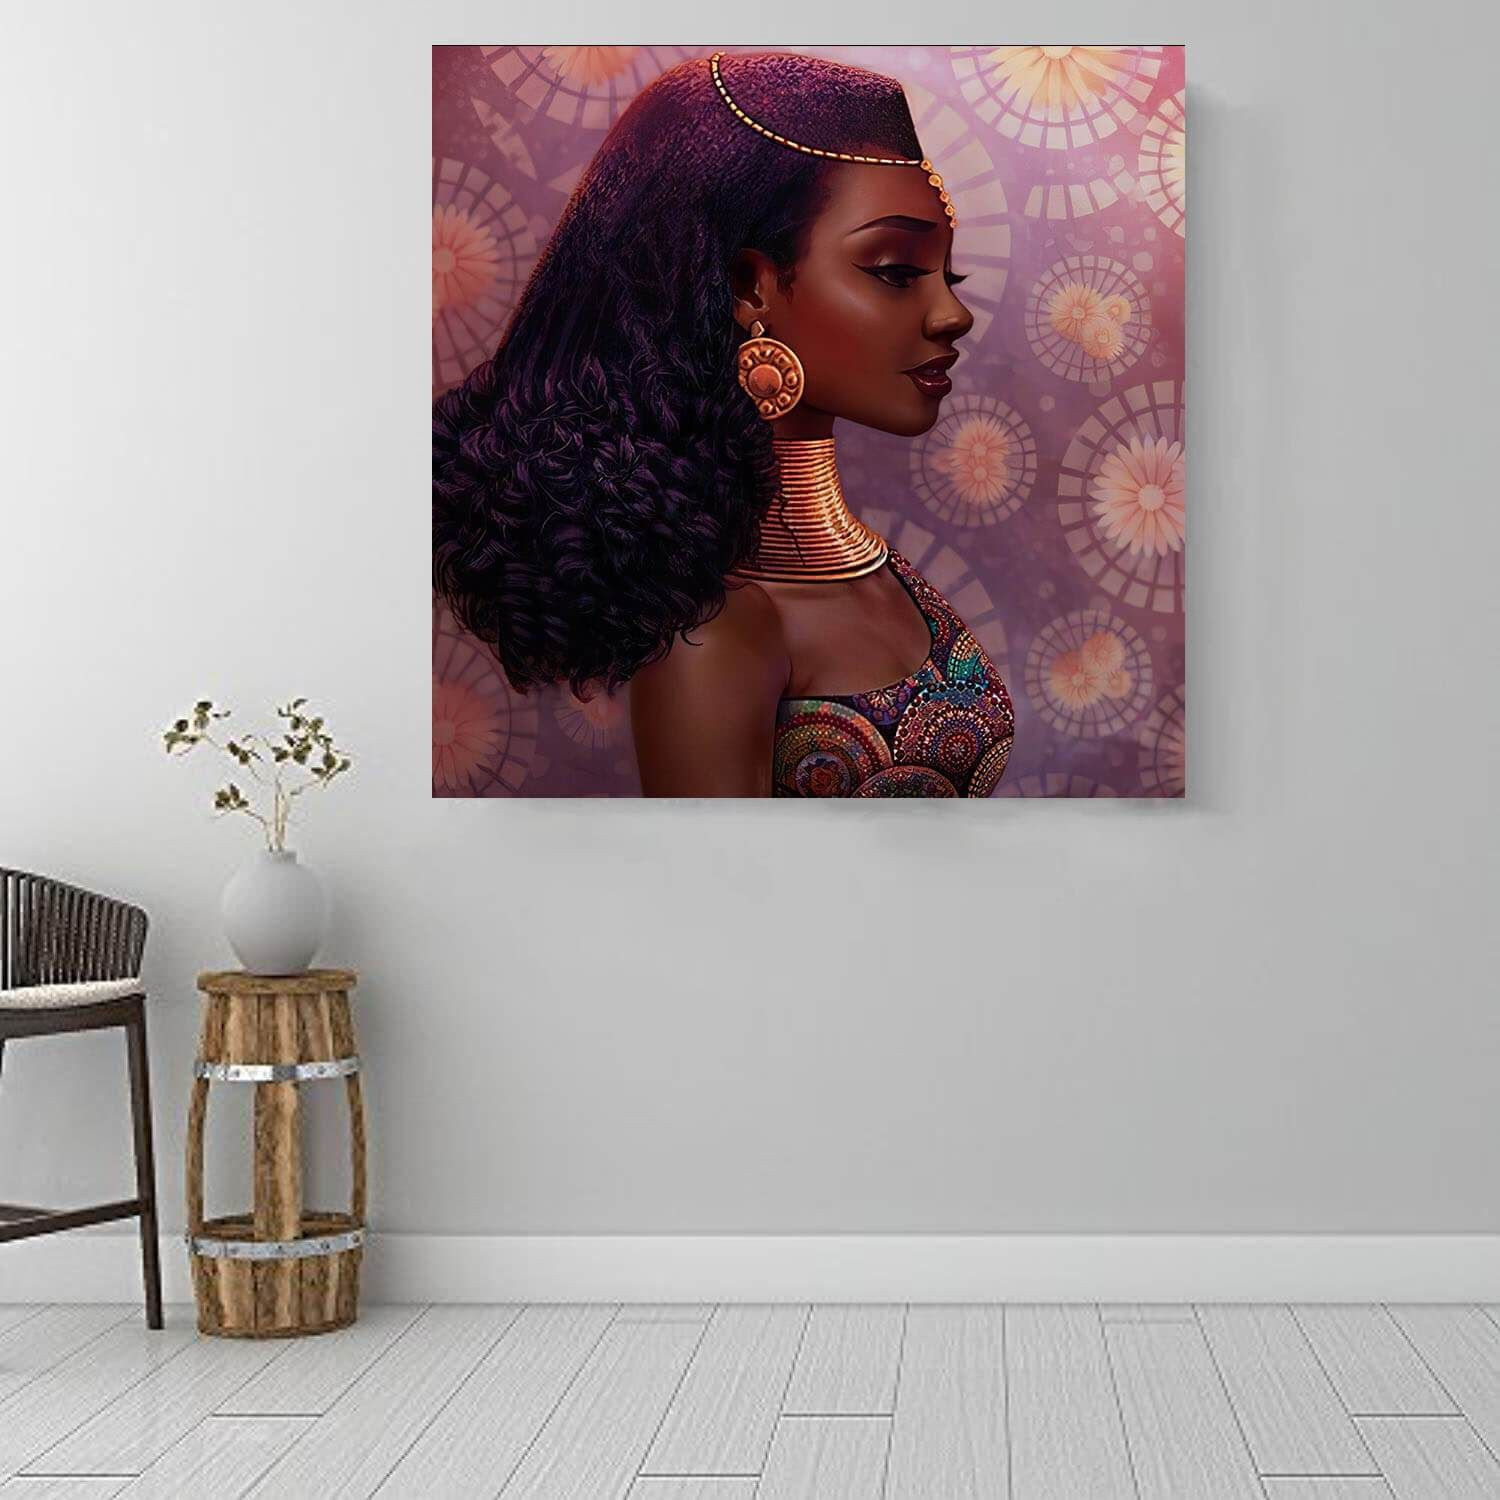 Framed Black Art Pretty African American Woman African American Wall Art And Decor Afrocentric Home Decor BPS63030